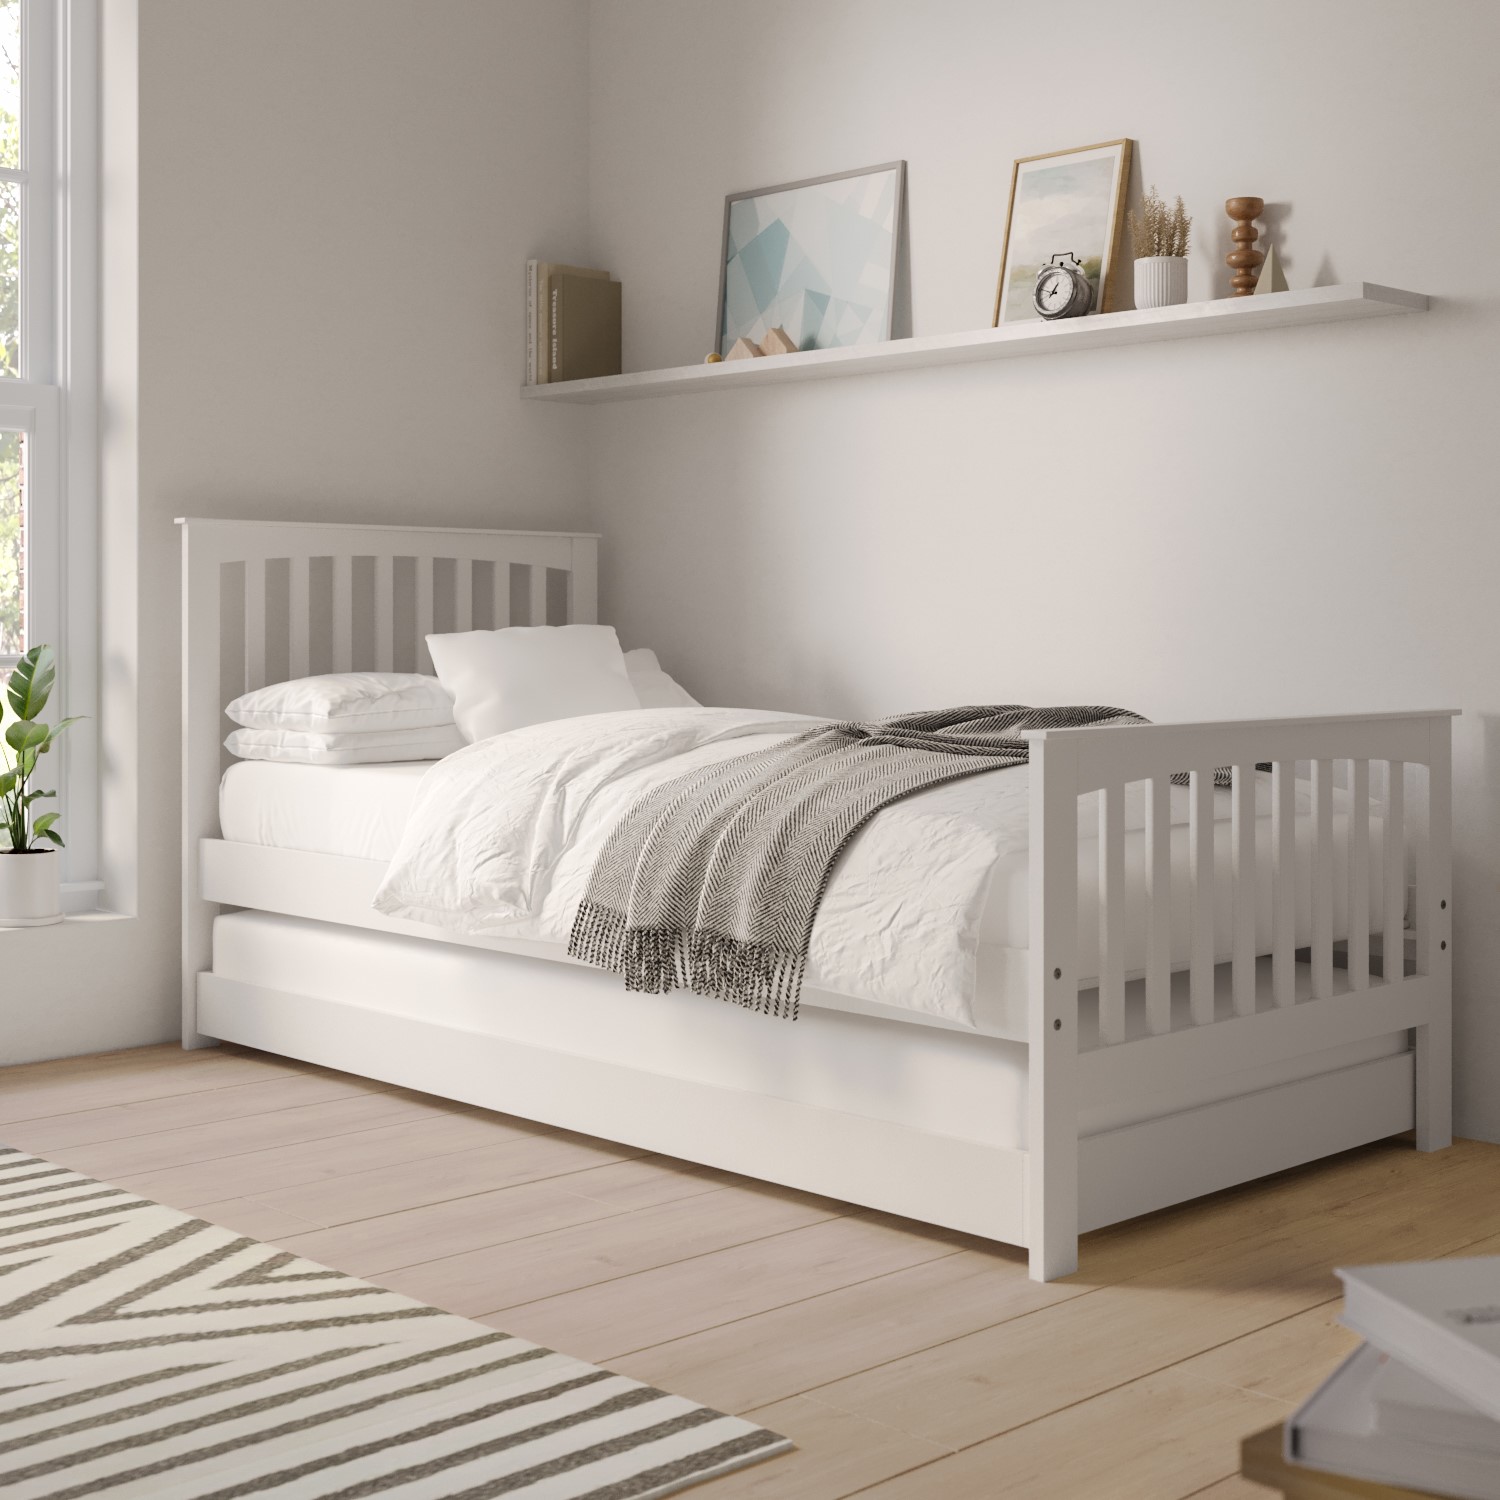 Read more about Oxford guest bed in cream with pop-up trundle